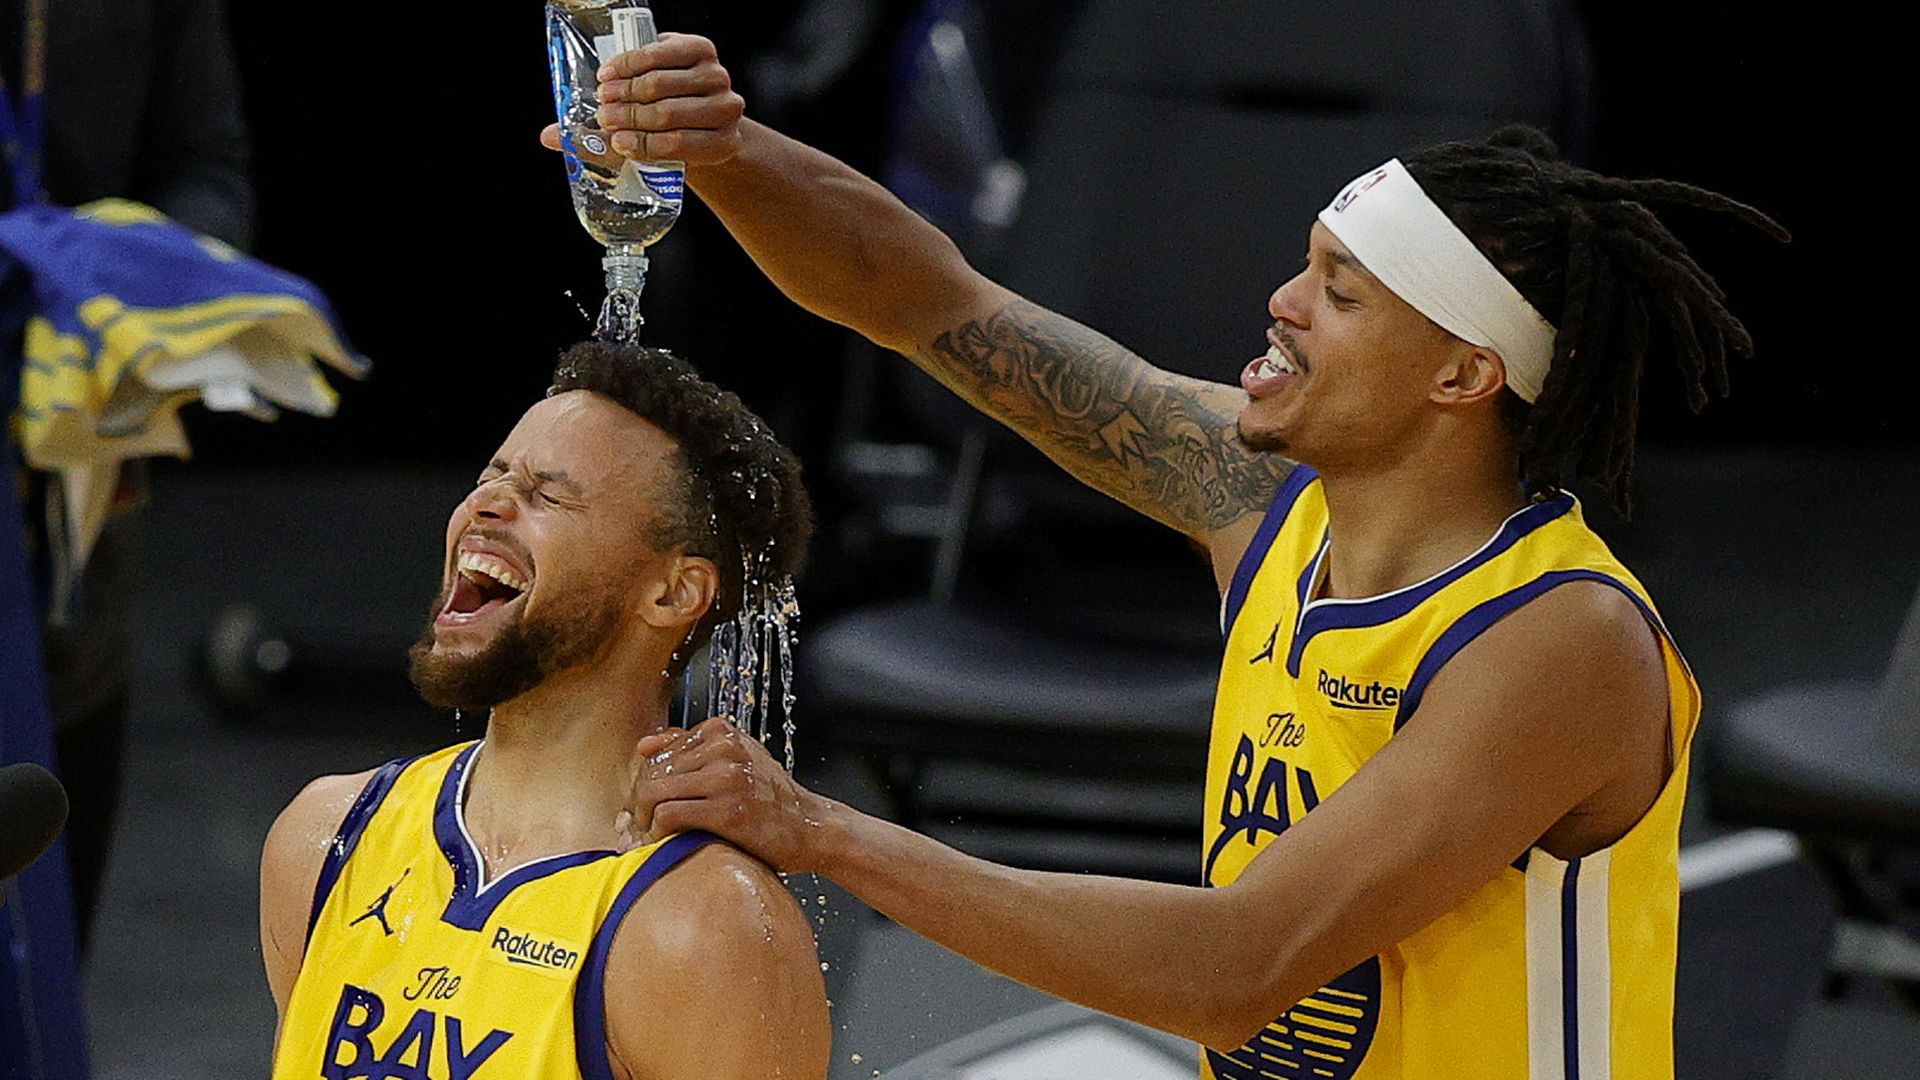 Steph Curry getting water poured on his head